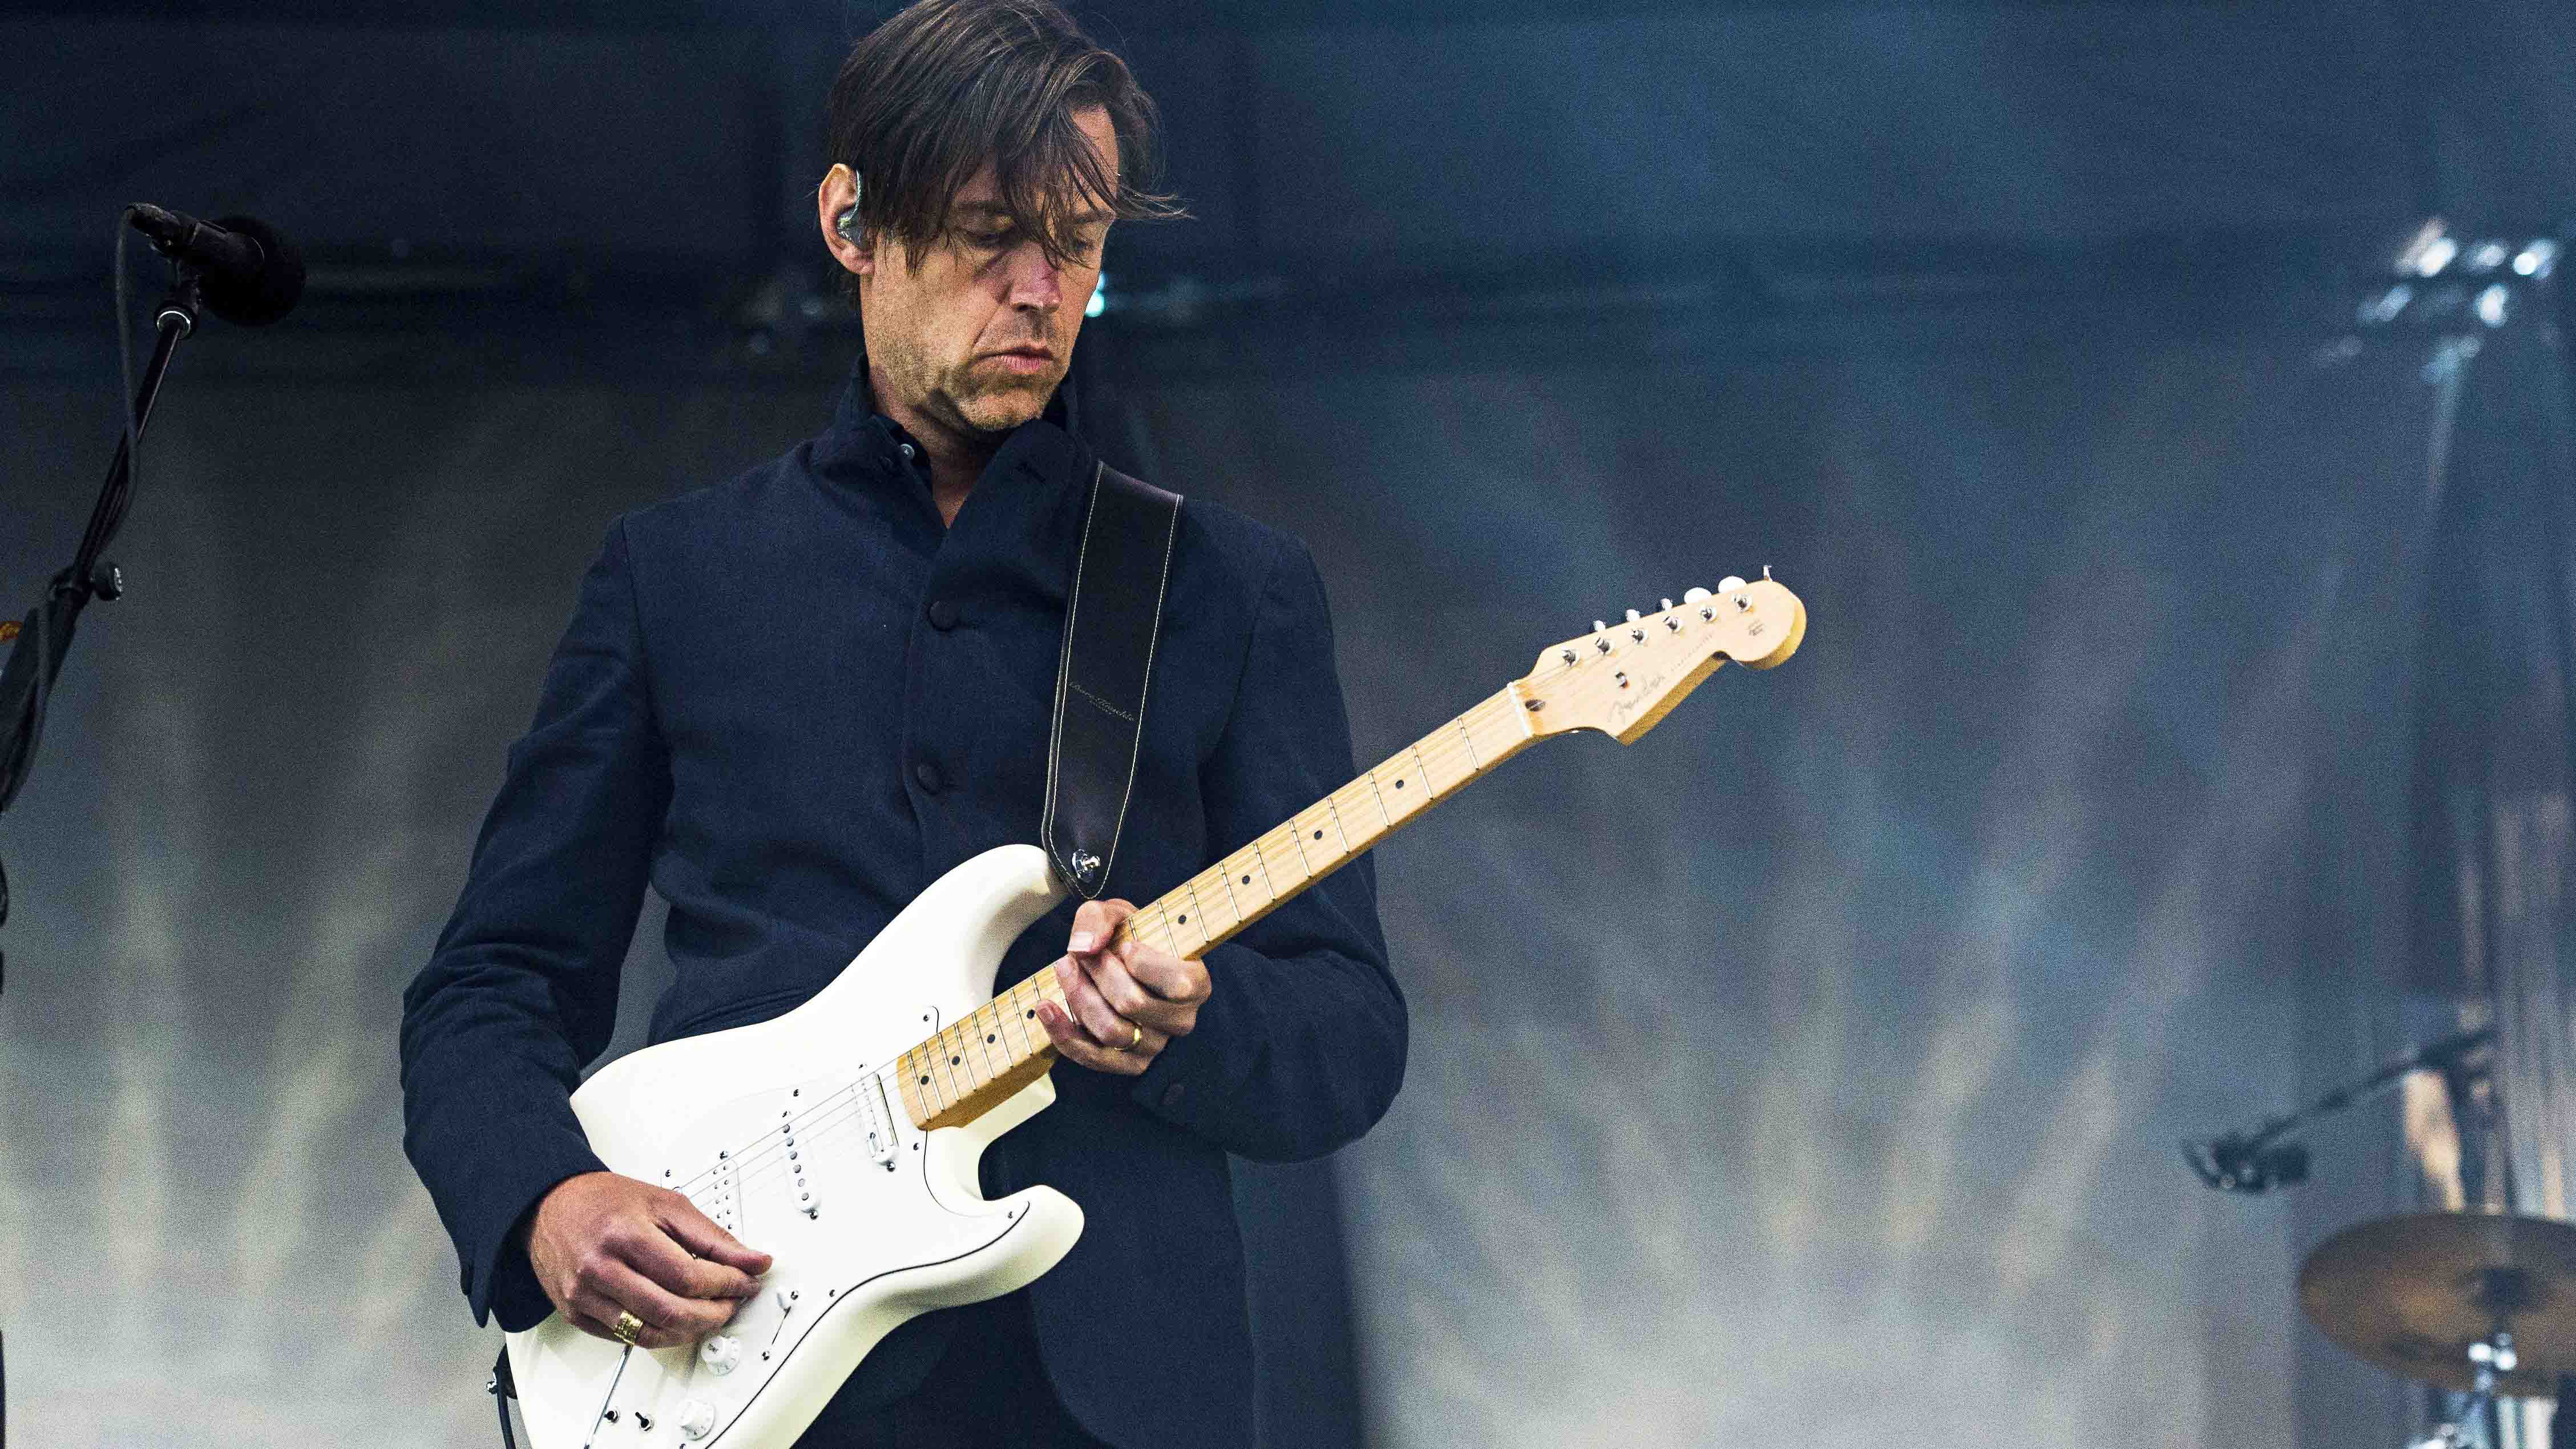 Radiohead’s Ed O’Brien: “I was always drawn to sounds that didn’t sound ...